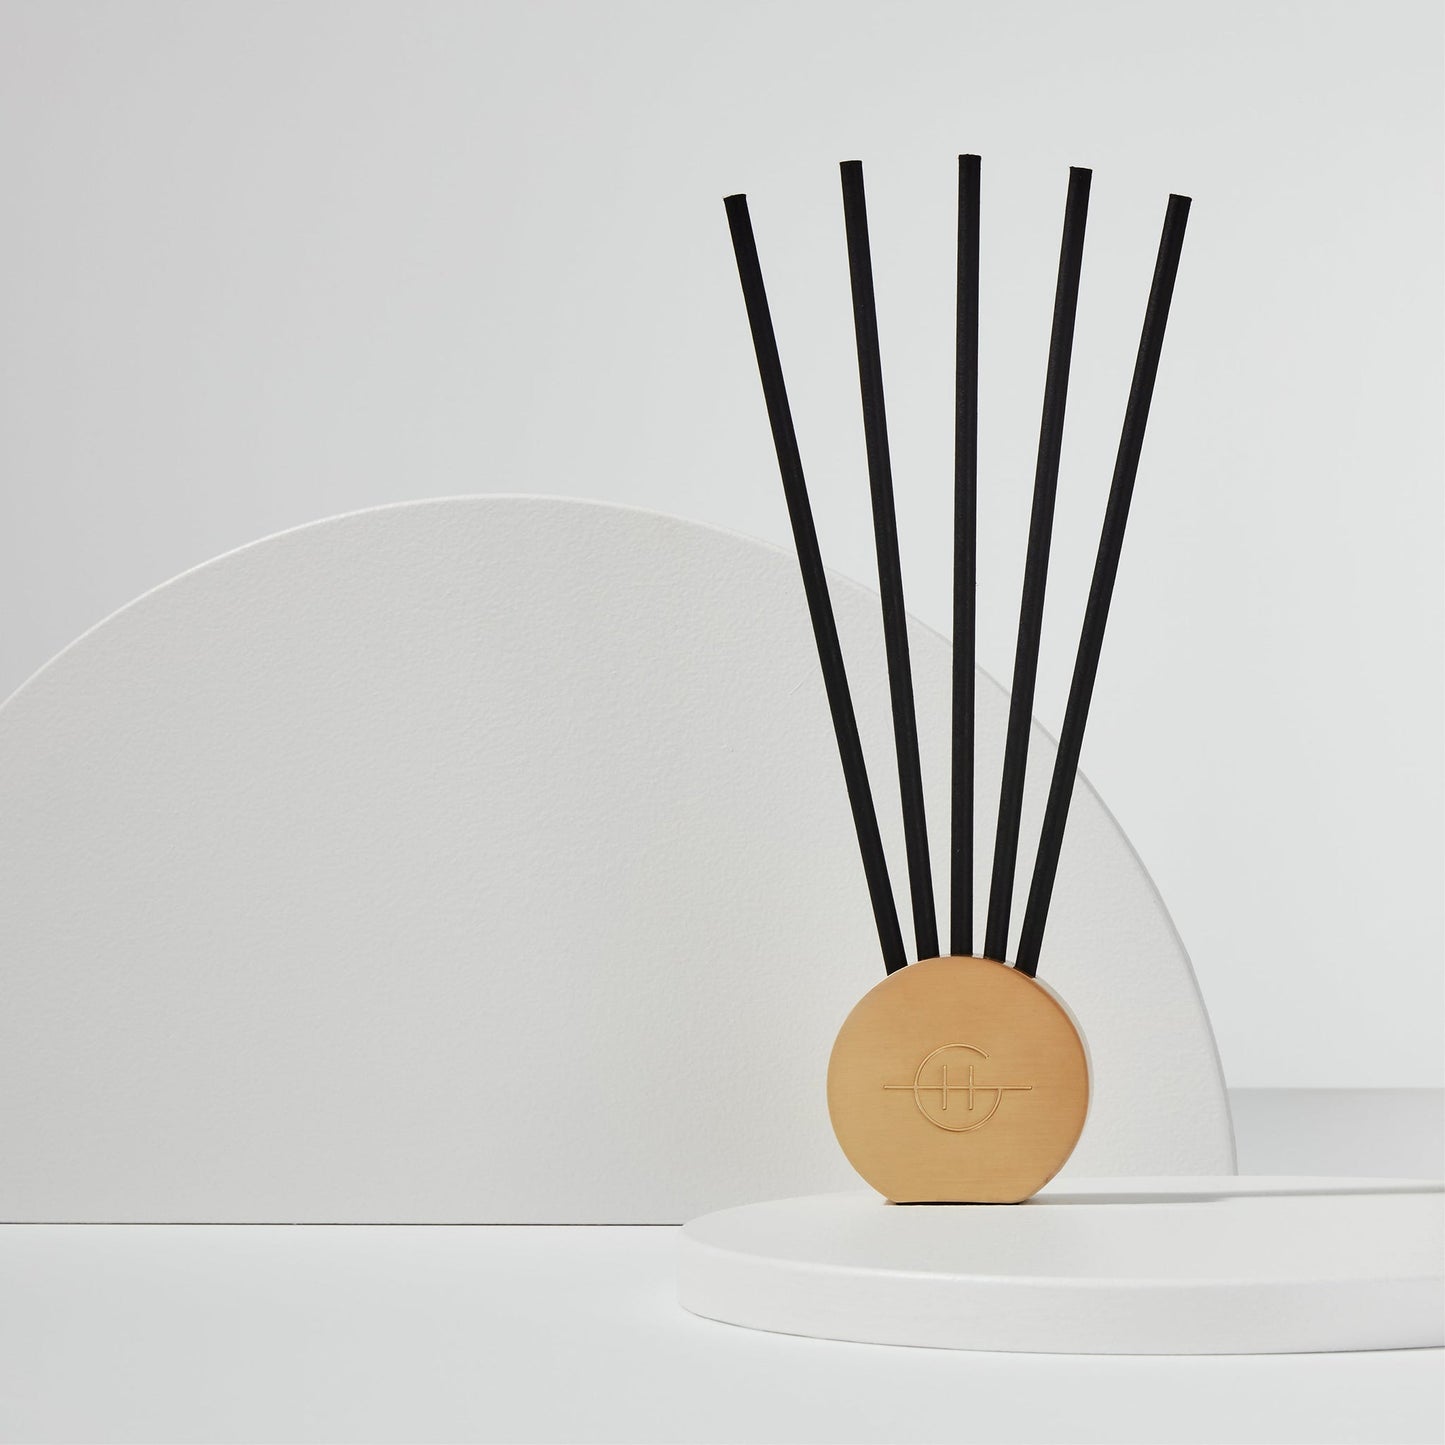 Gold Scent Scene Metal Vessel filled with scent stems and displayed on a white surface in front of a white half circle